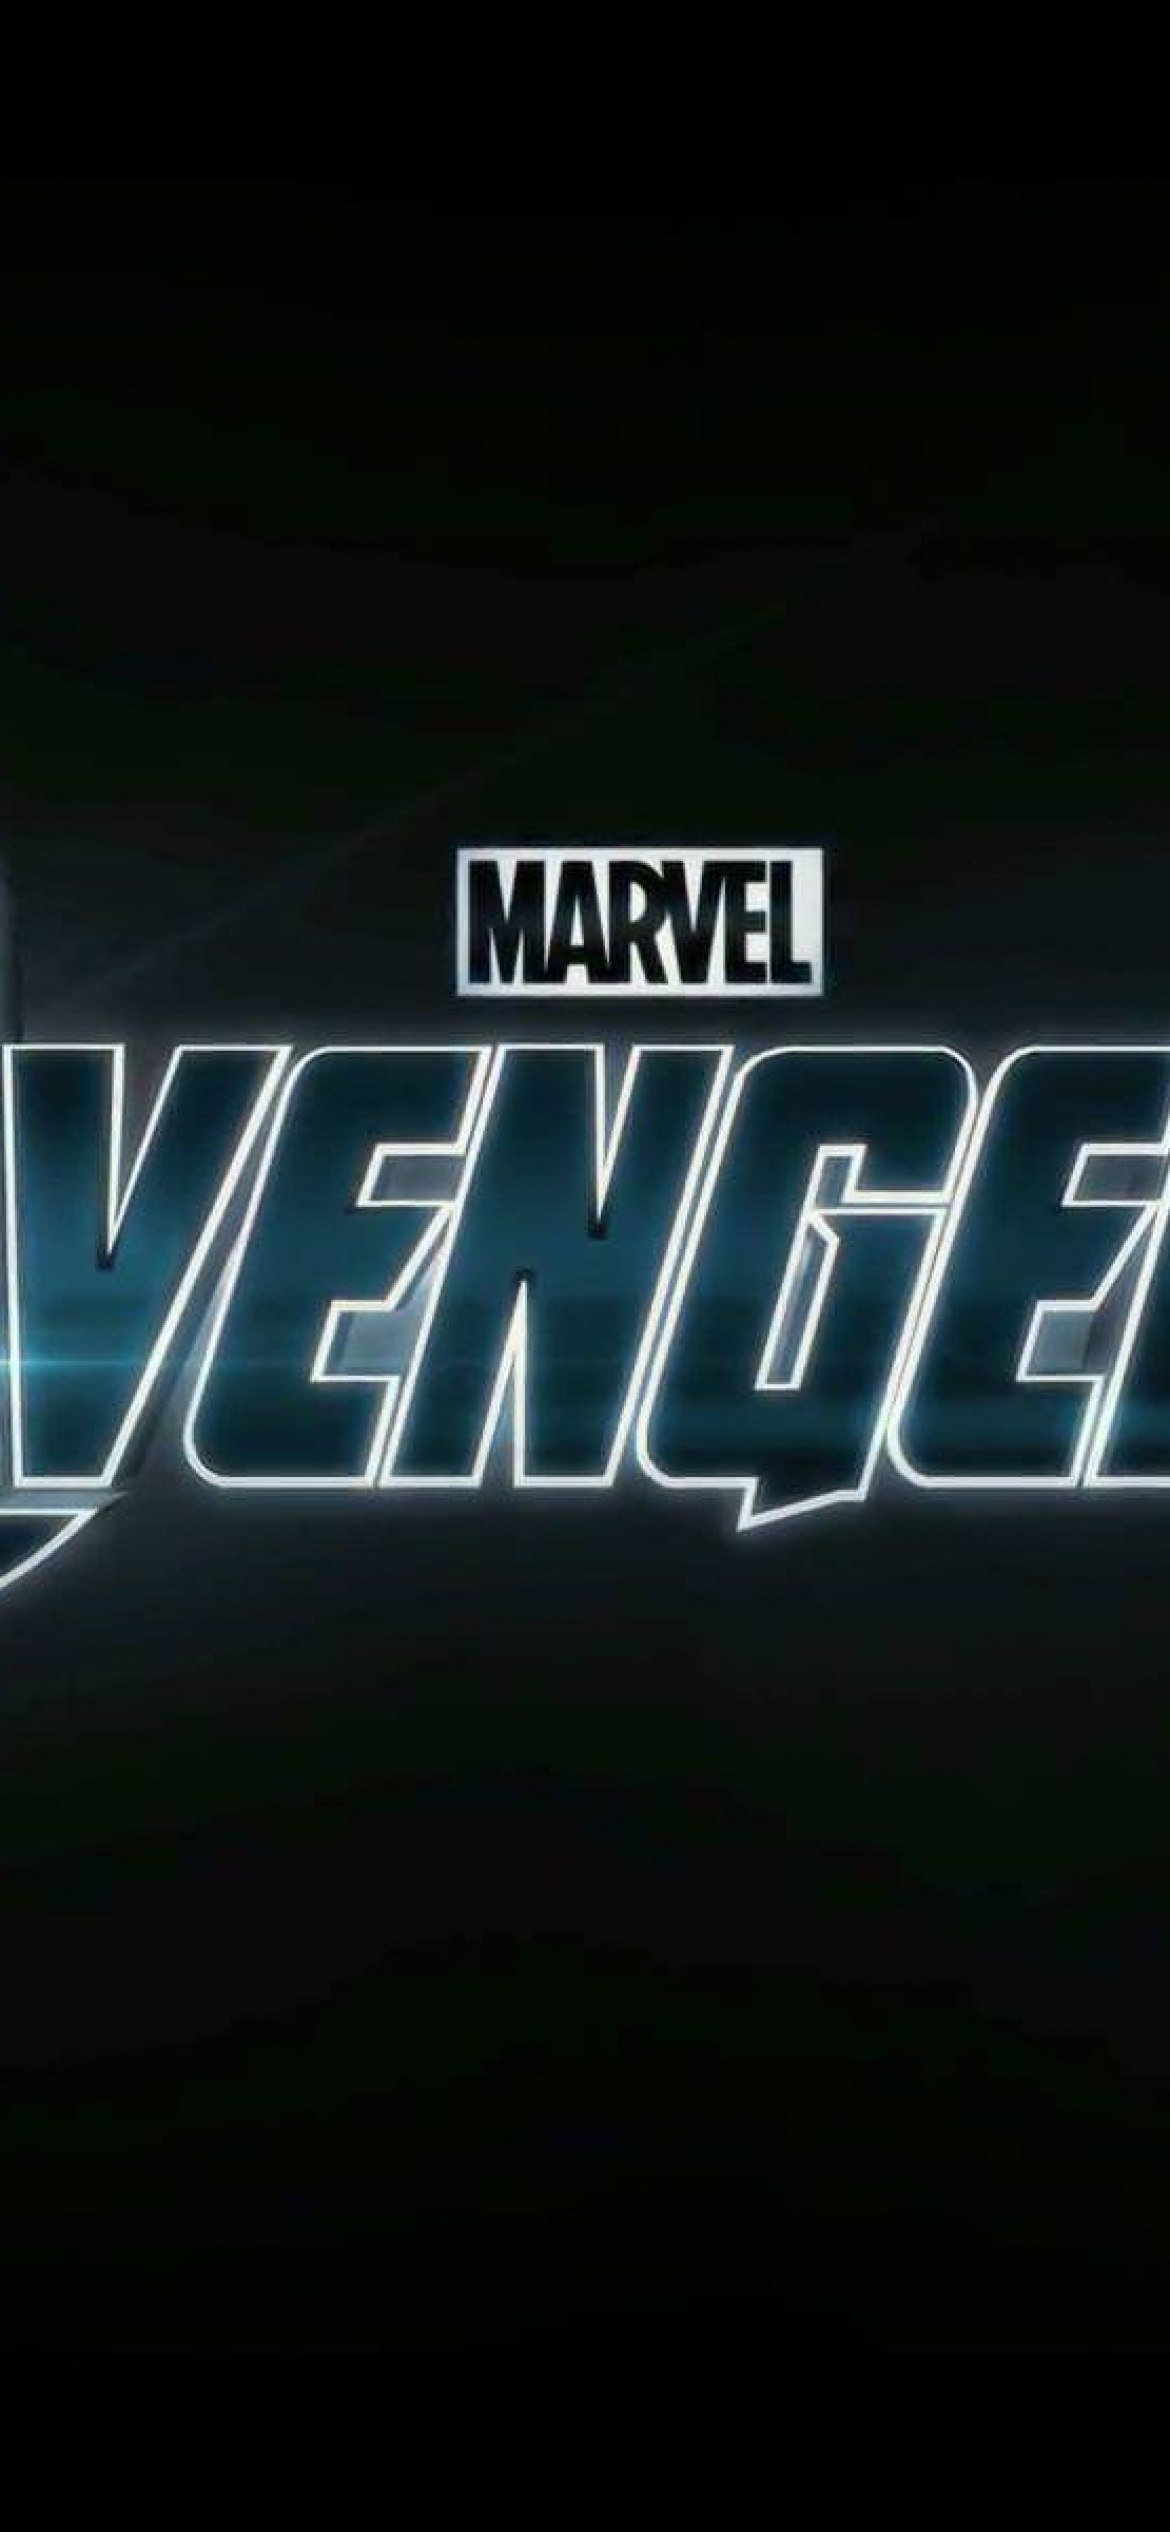 The Avengers Logo by Marvel on the Screen Editorial Photo - Image of  avengers, american: 225841686